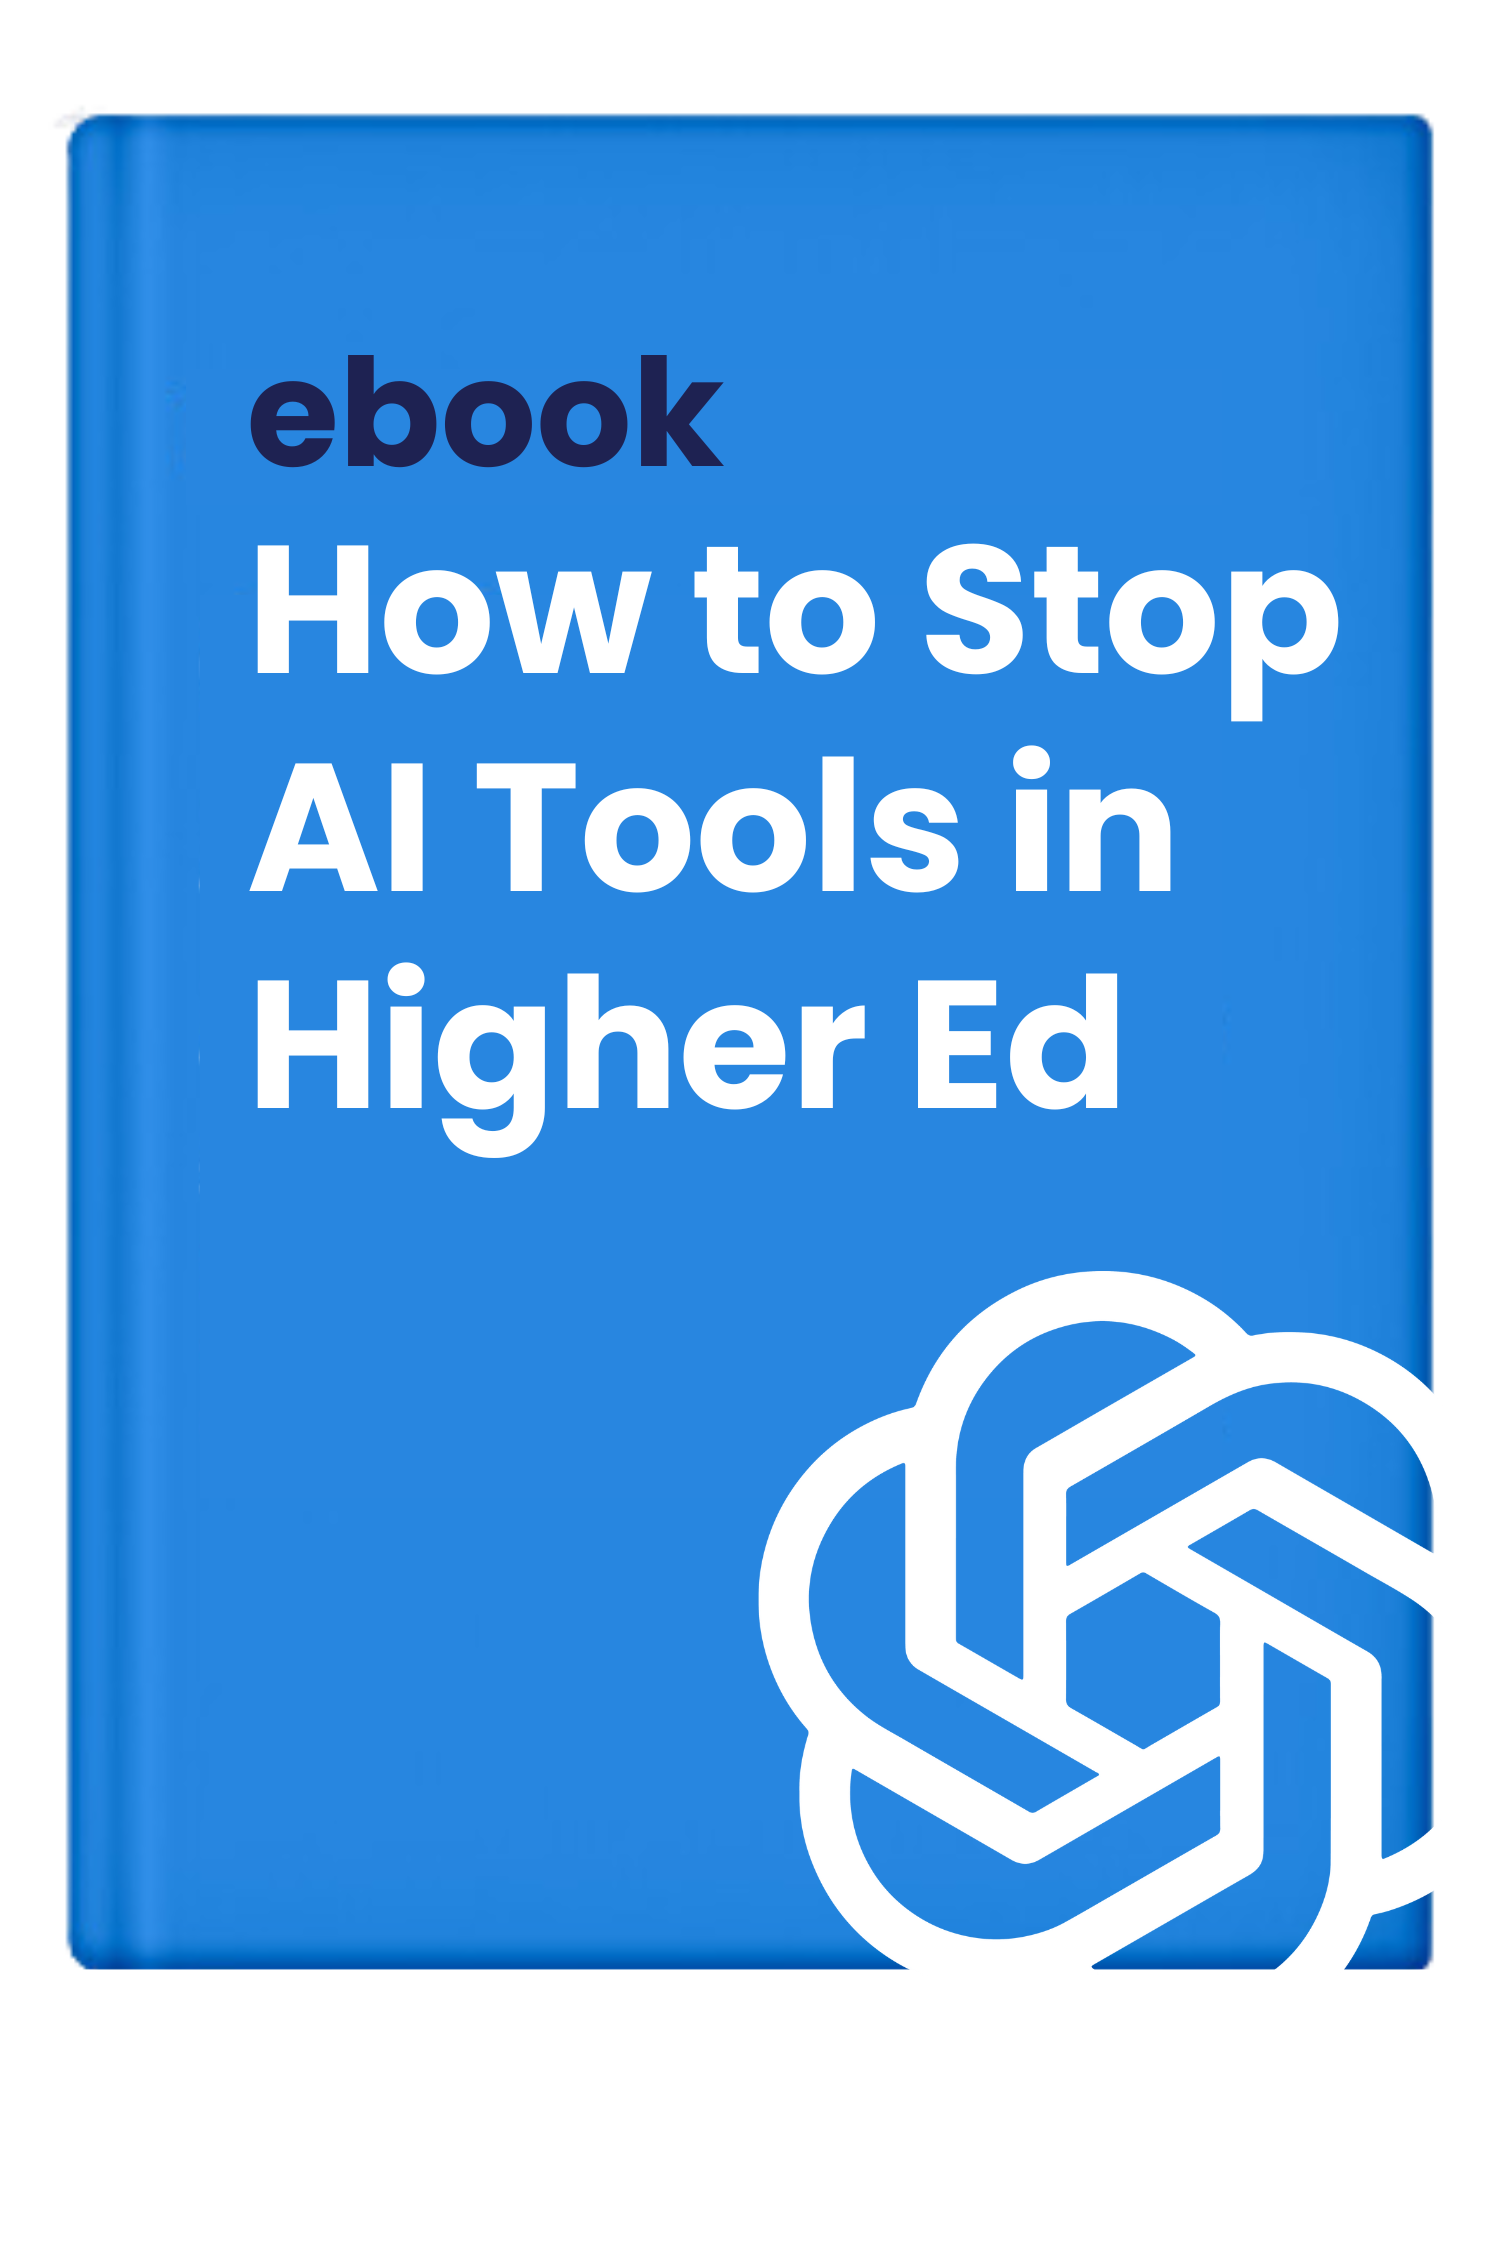 ebook cover about how to stop AI tools used for cheating in higher education